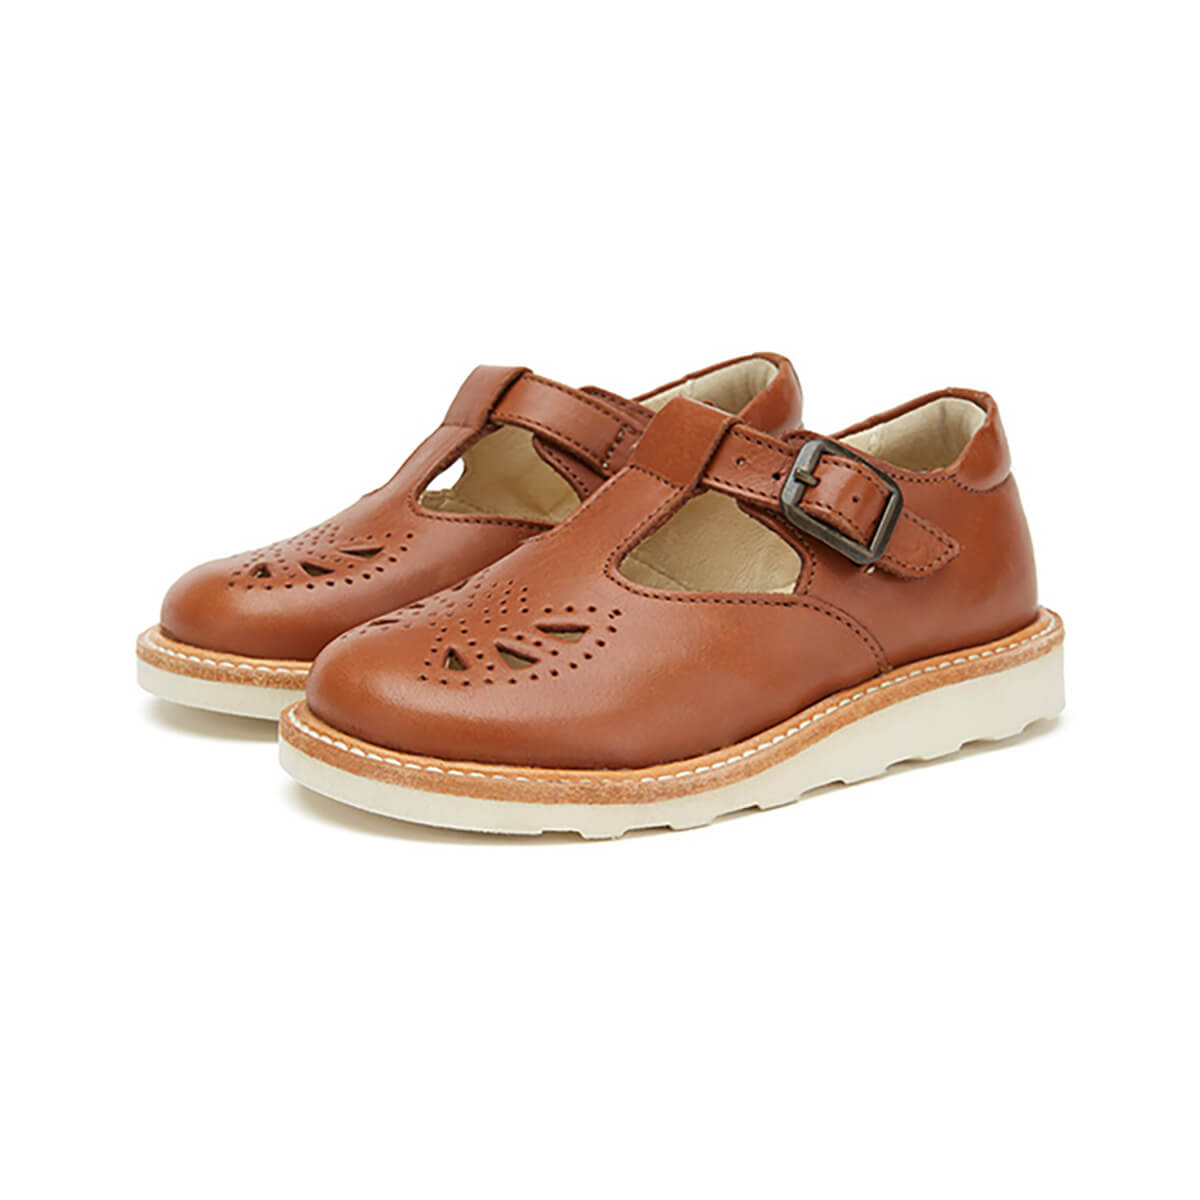 Rosie T-Bar Shoes in Chestnut Brown Leather by Young Soles – Junior Edition